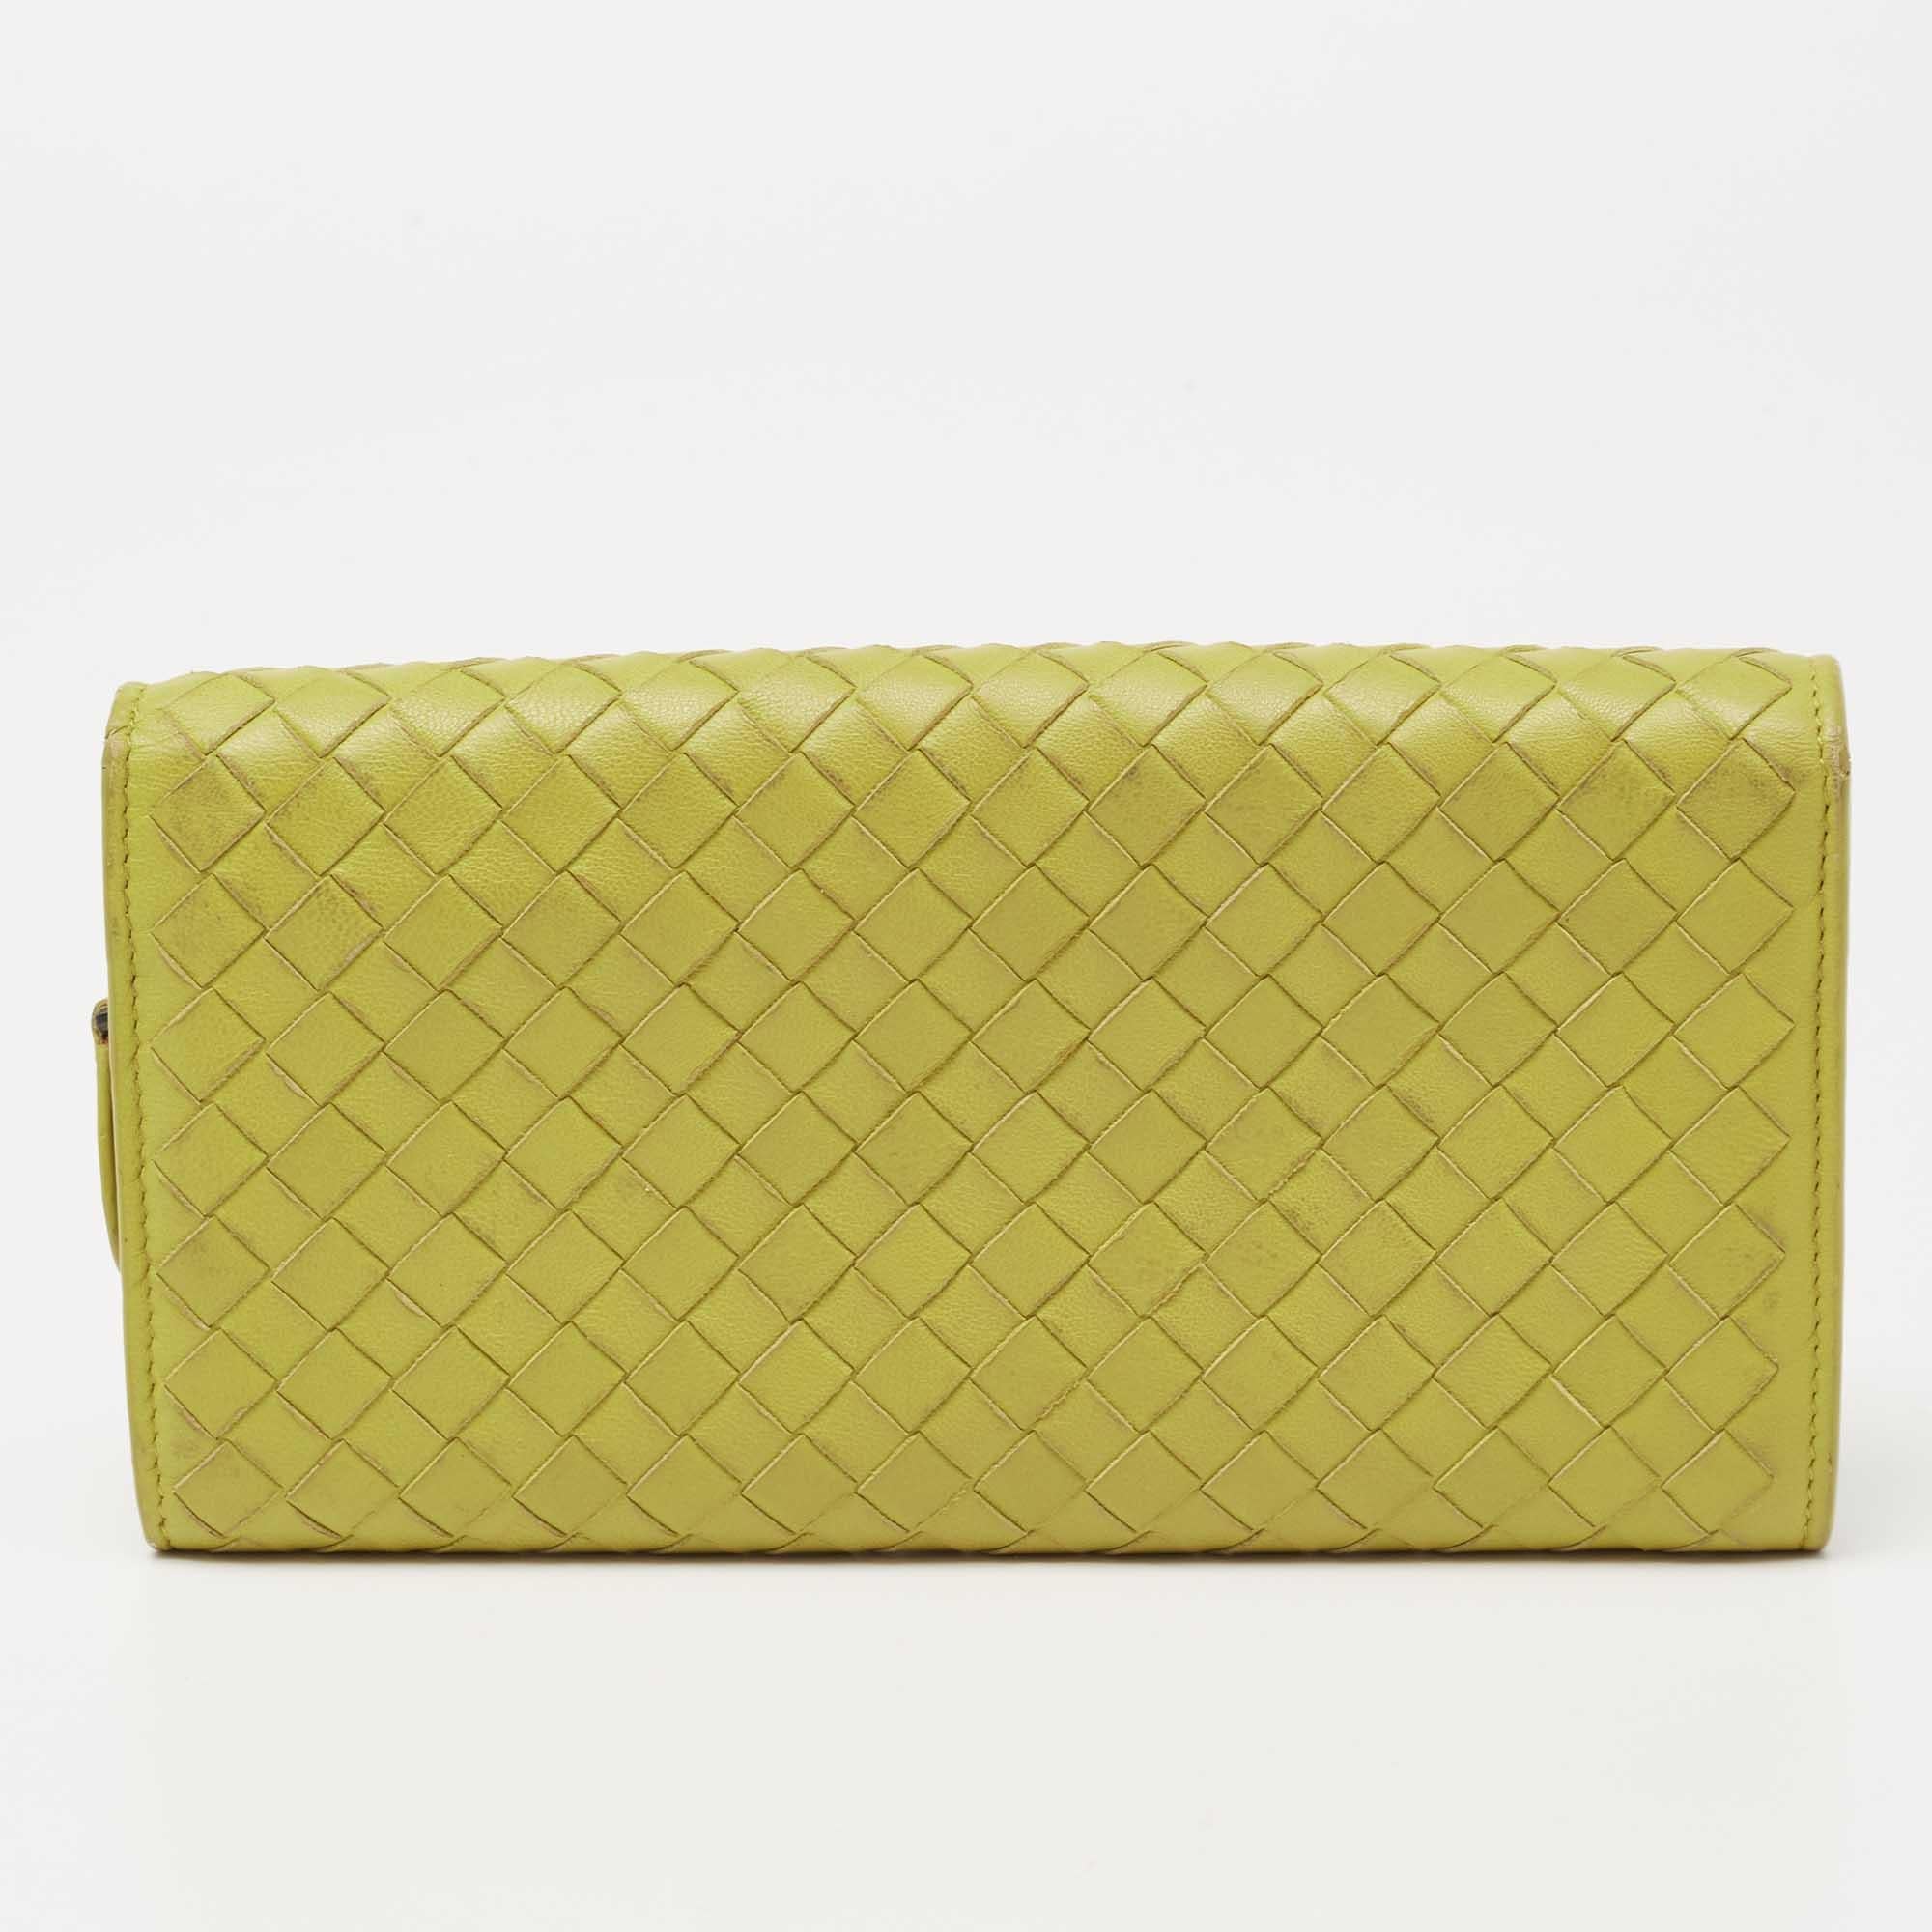 Showcasing the brand's expertise in the weaving technique, this Bottega Veneta wallet is made from Intrecciato leather. Its compartmentalized interior will keep your monetary essentials securely and it has black-tone hardware.

Includes: The Luxury